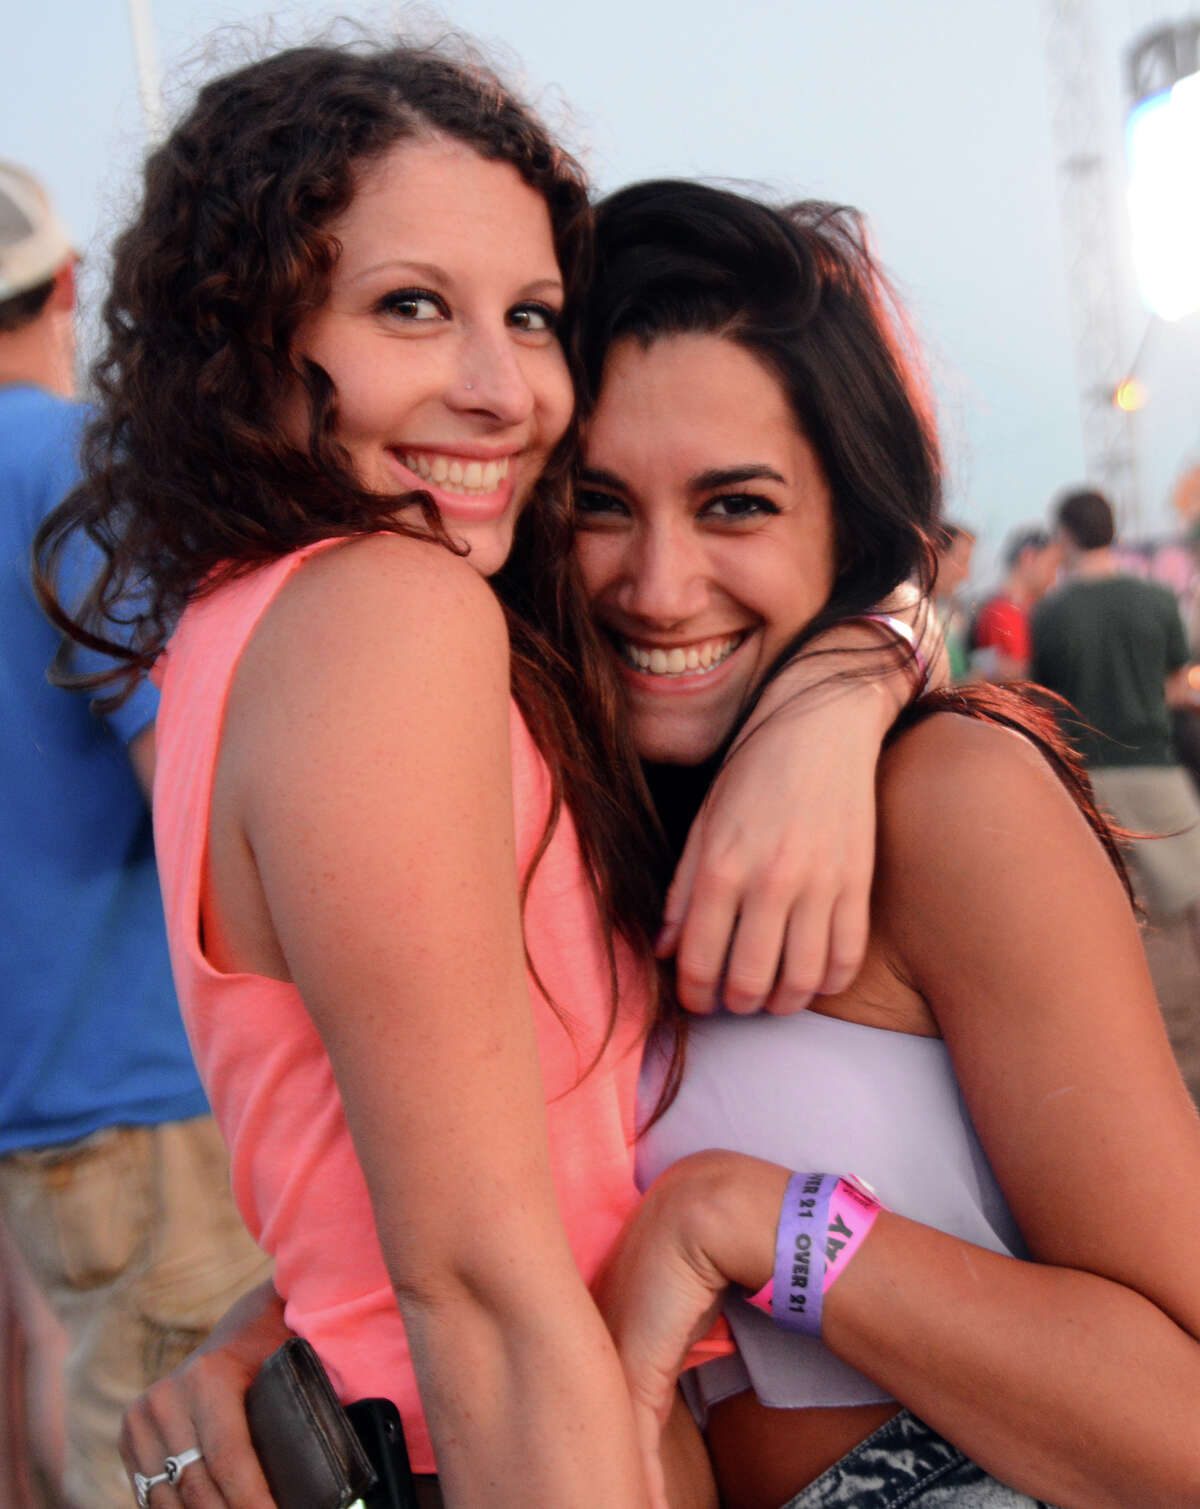 Jena Wright, left, and her friend Bronte Uccellini enjoy the 18th Annual Gathering of the Vibes music festival at Seaside Park in Bridgeport, Conn. on Friday July 27, 2013.